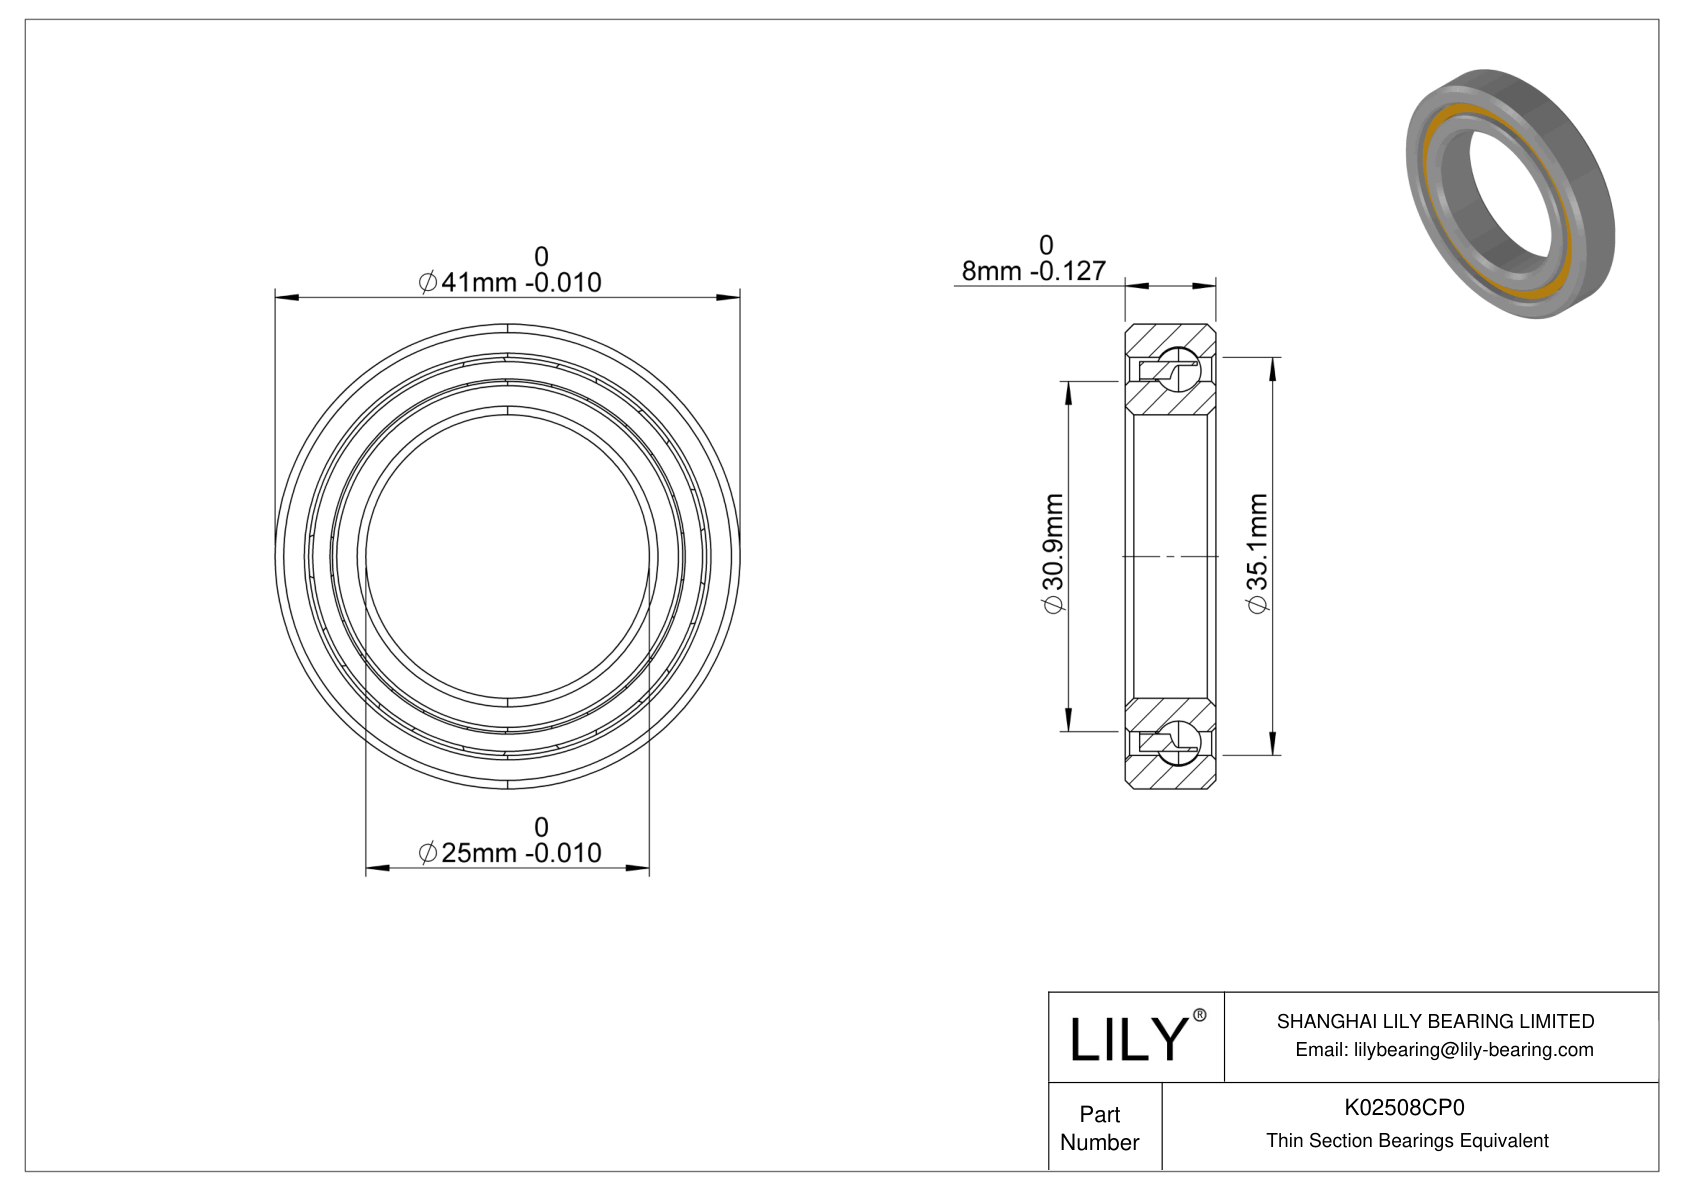 K02508CP0 Constant Section (CS) Bearings cad drawing